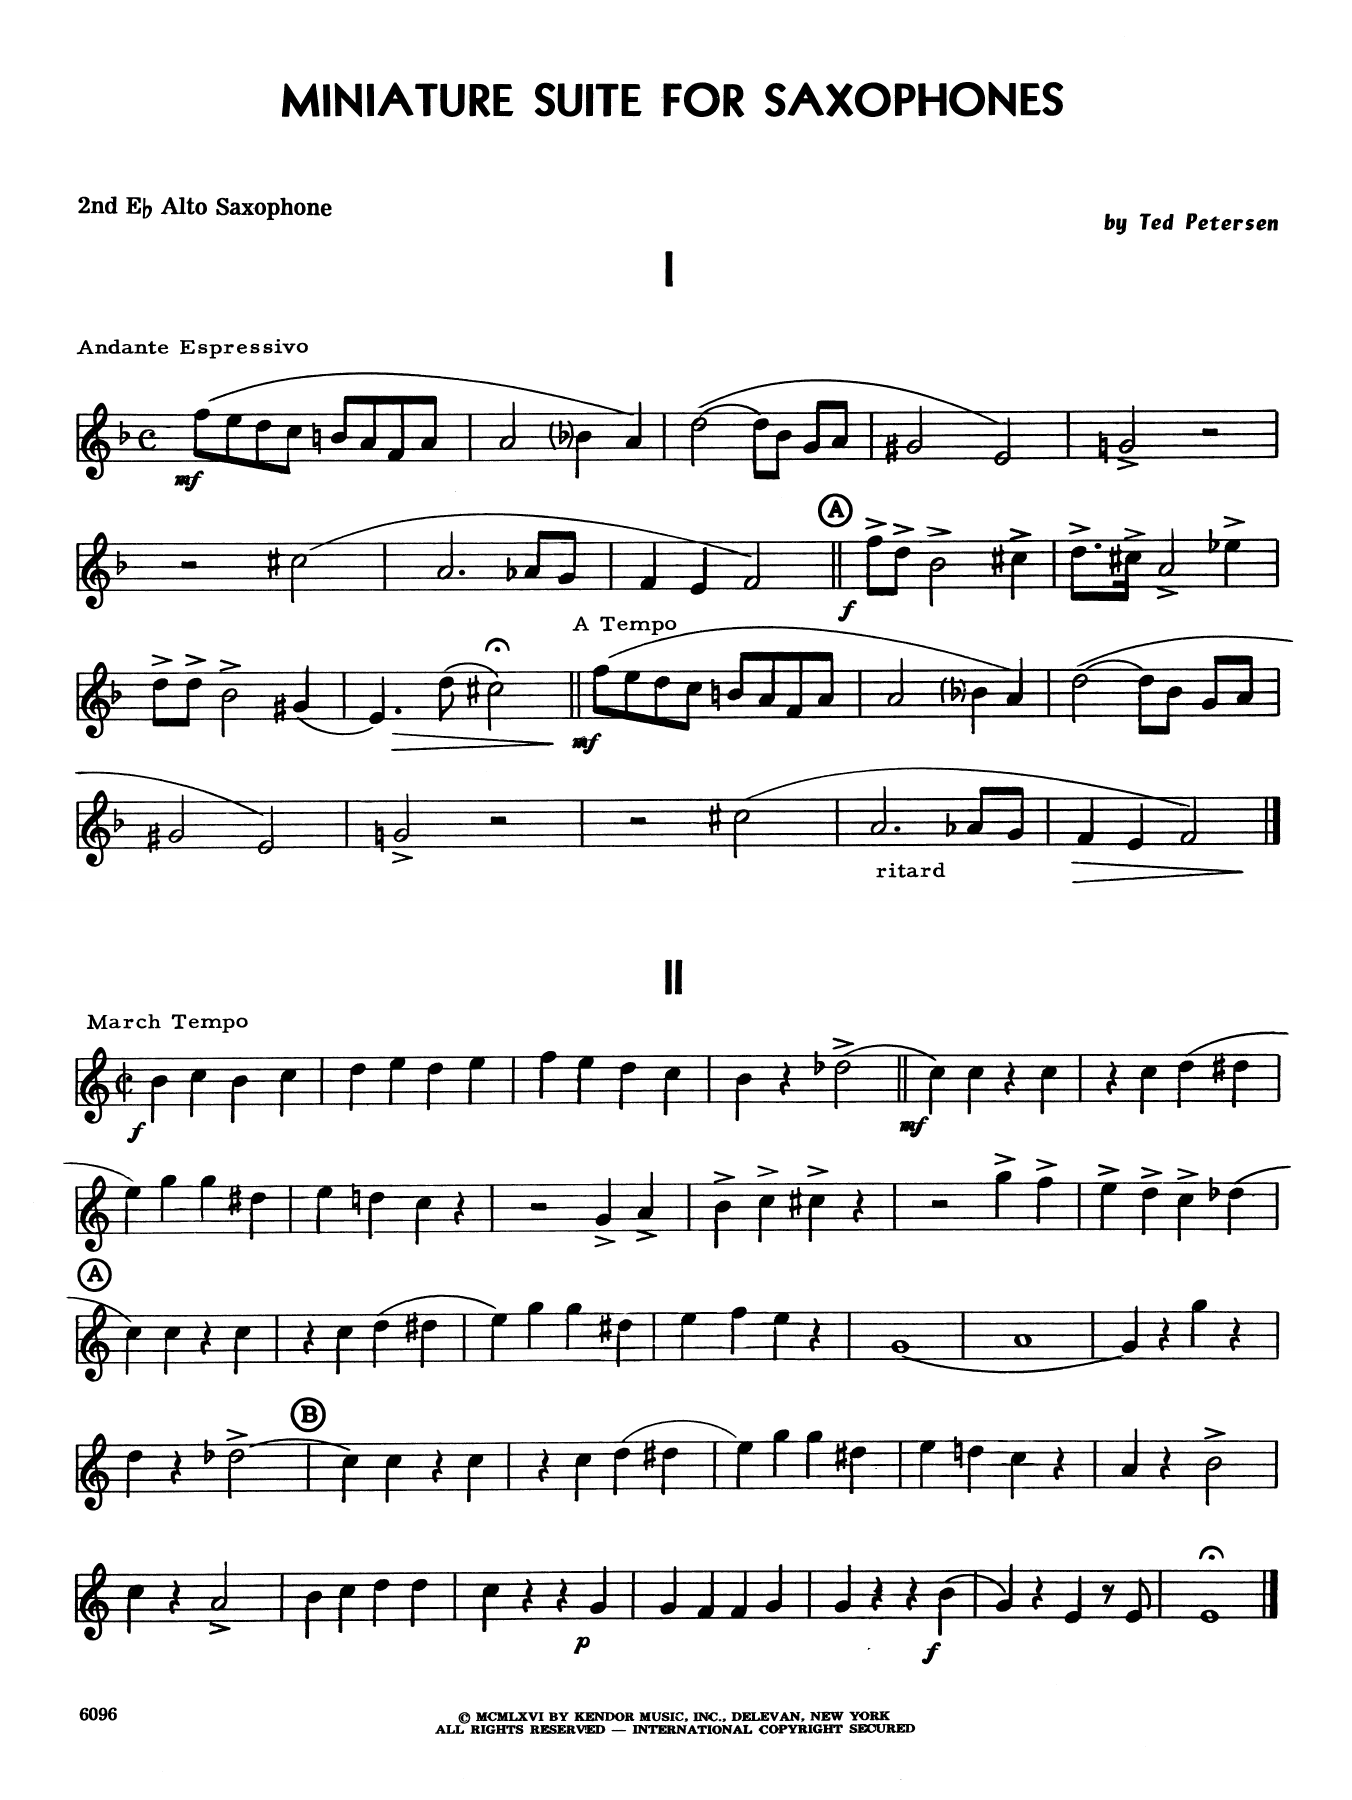 Download Ted Petersen Miniature Suite for Saxophones - 2nd Eb Sheet Music